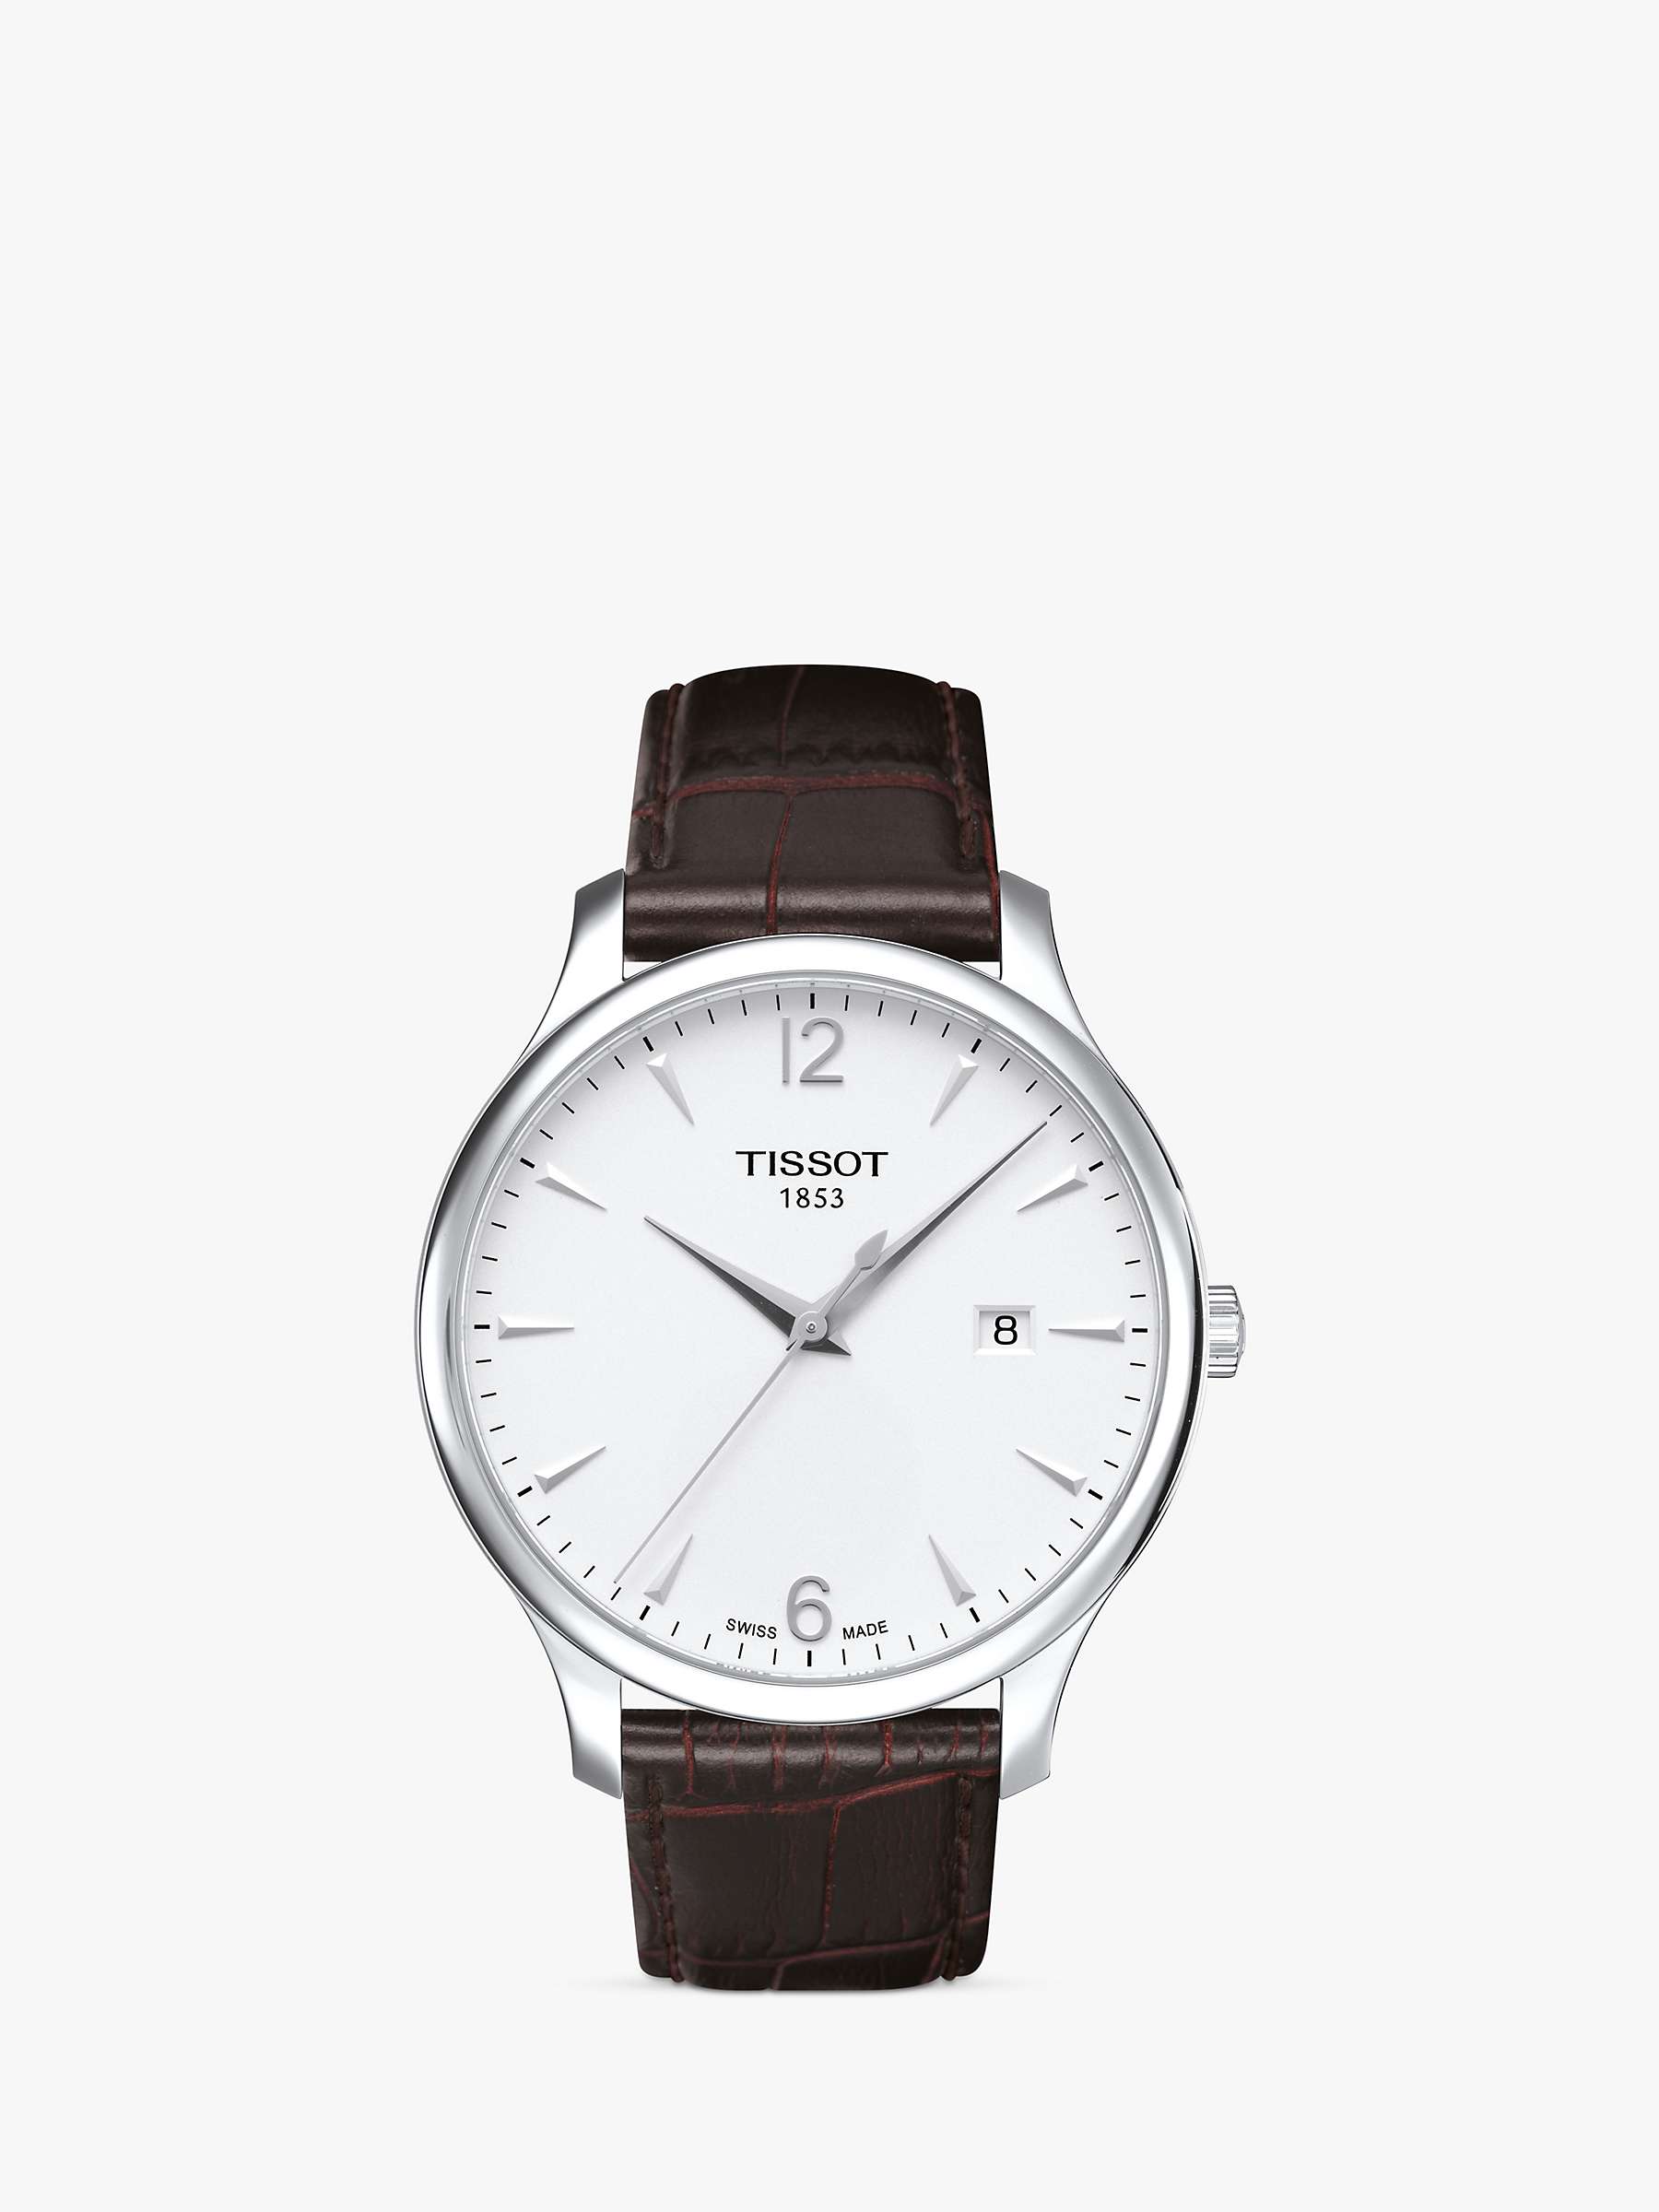 Buy Tissot T0636101603700 Men's Tradition Date Leather Strap Watch, Brown/White Online at johnlewis.com